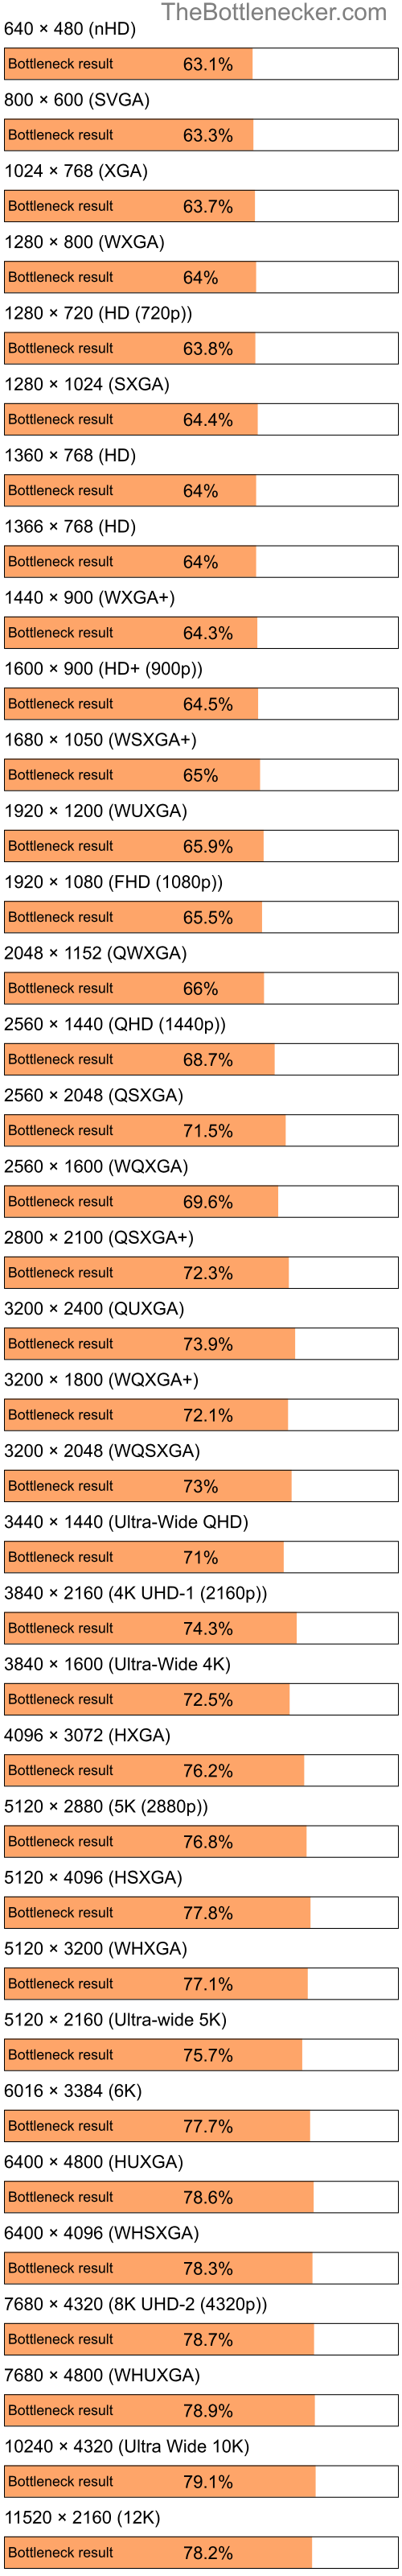 Bottleneck results by resolution for Intel Pentium 4 and AMD Radeon X1600 Pro in General Tasks